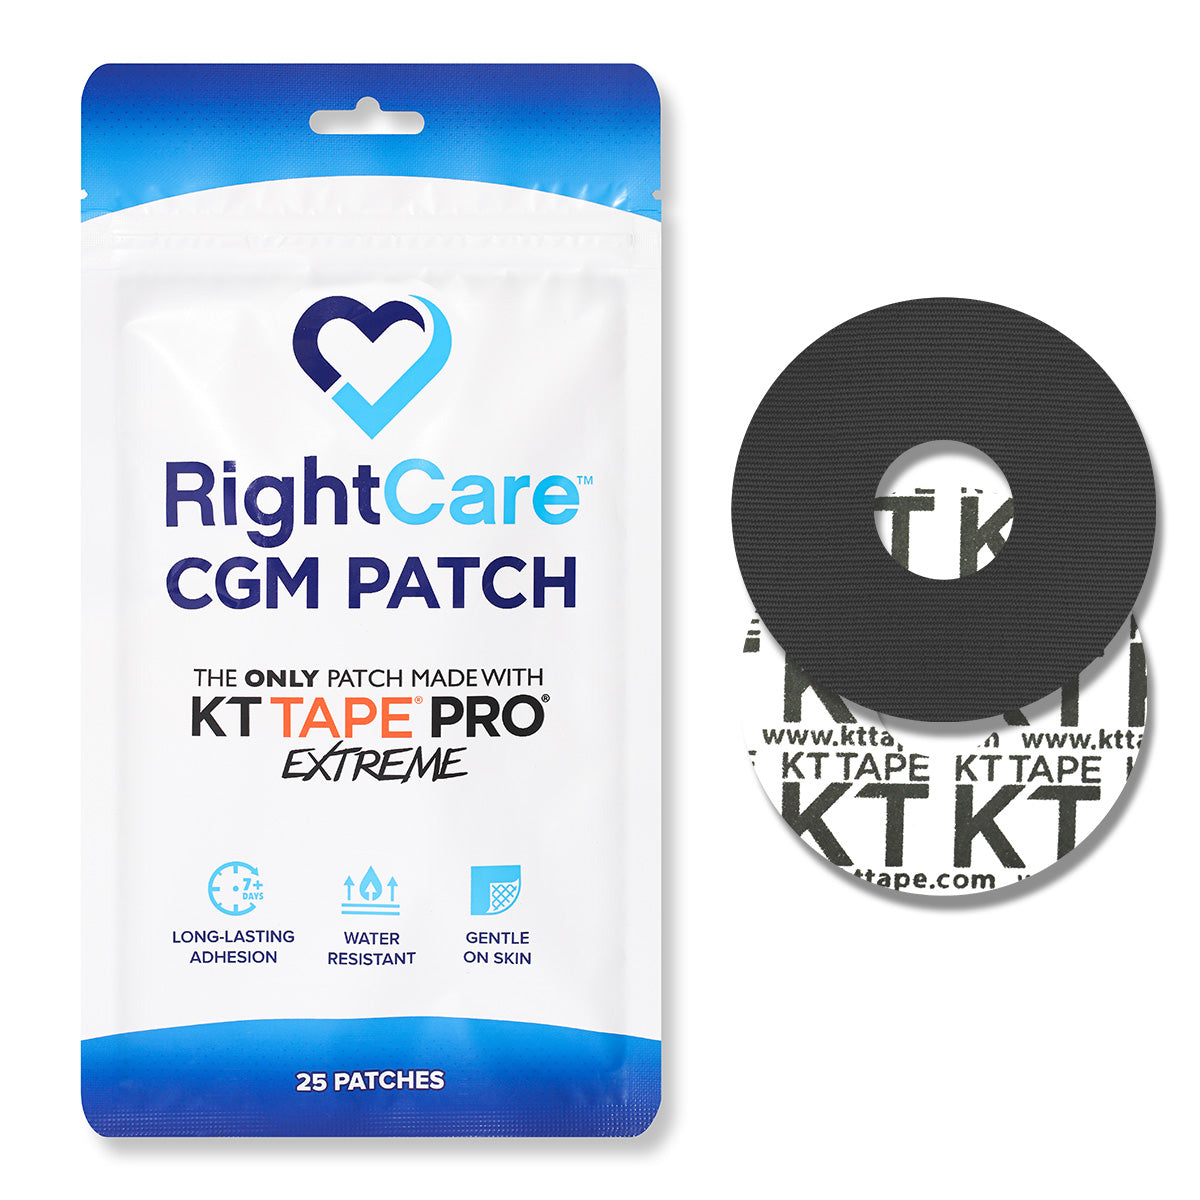 RightCare CGM Adhesive Patch made with KT Tape, Libre, Bag of 25 30354793